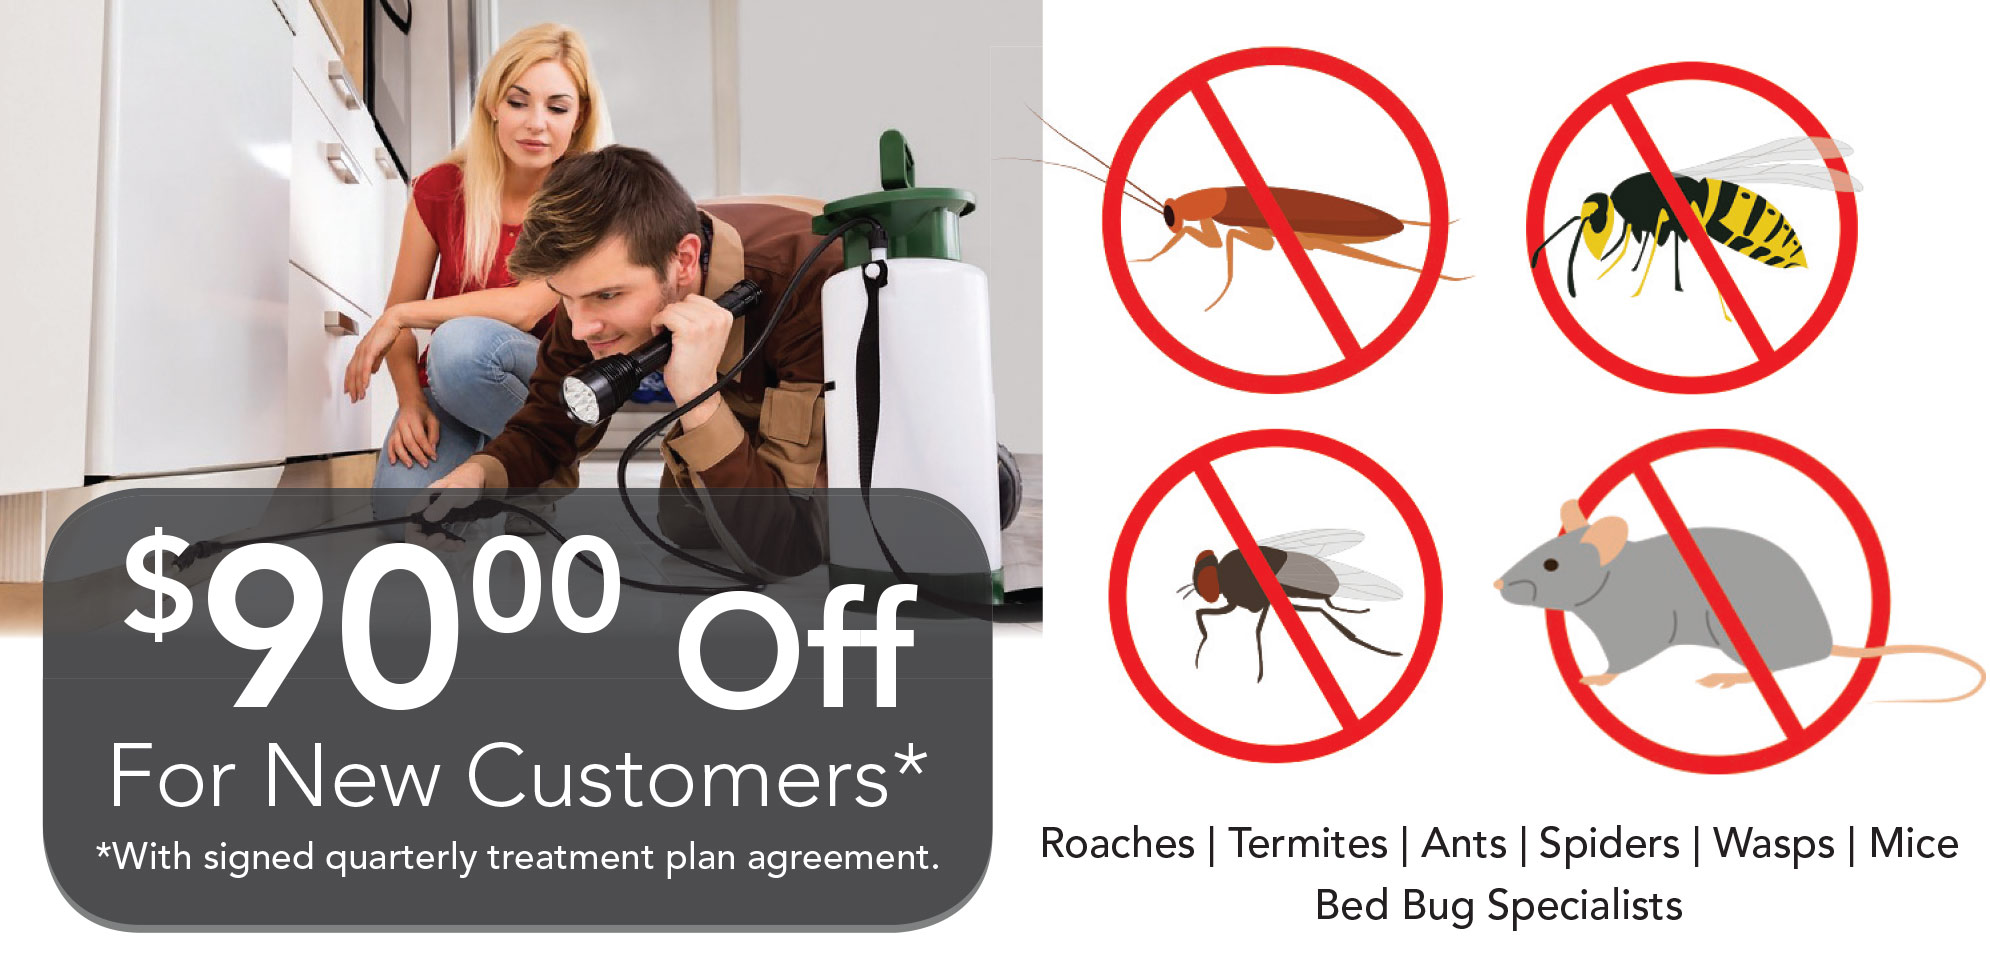 $90.00 off new customers with signed quarterly plan agreement